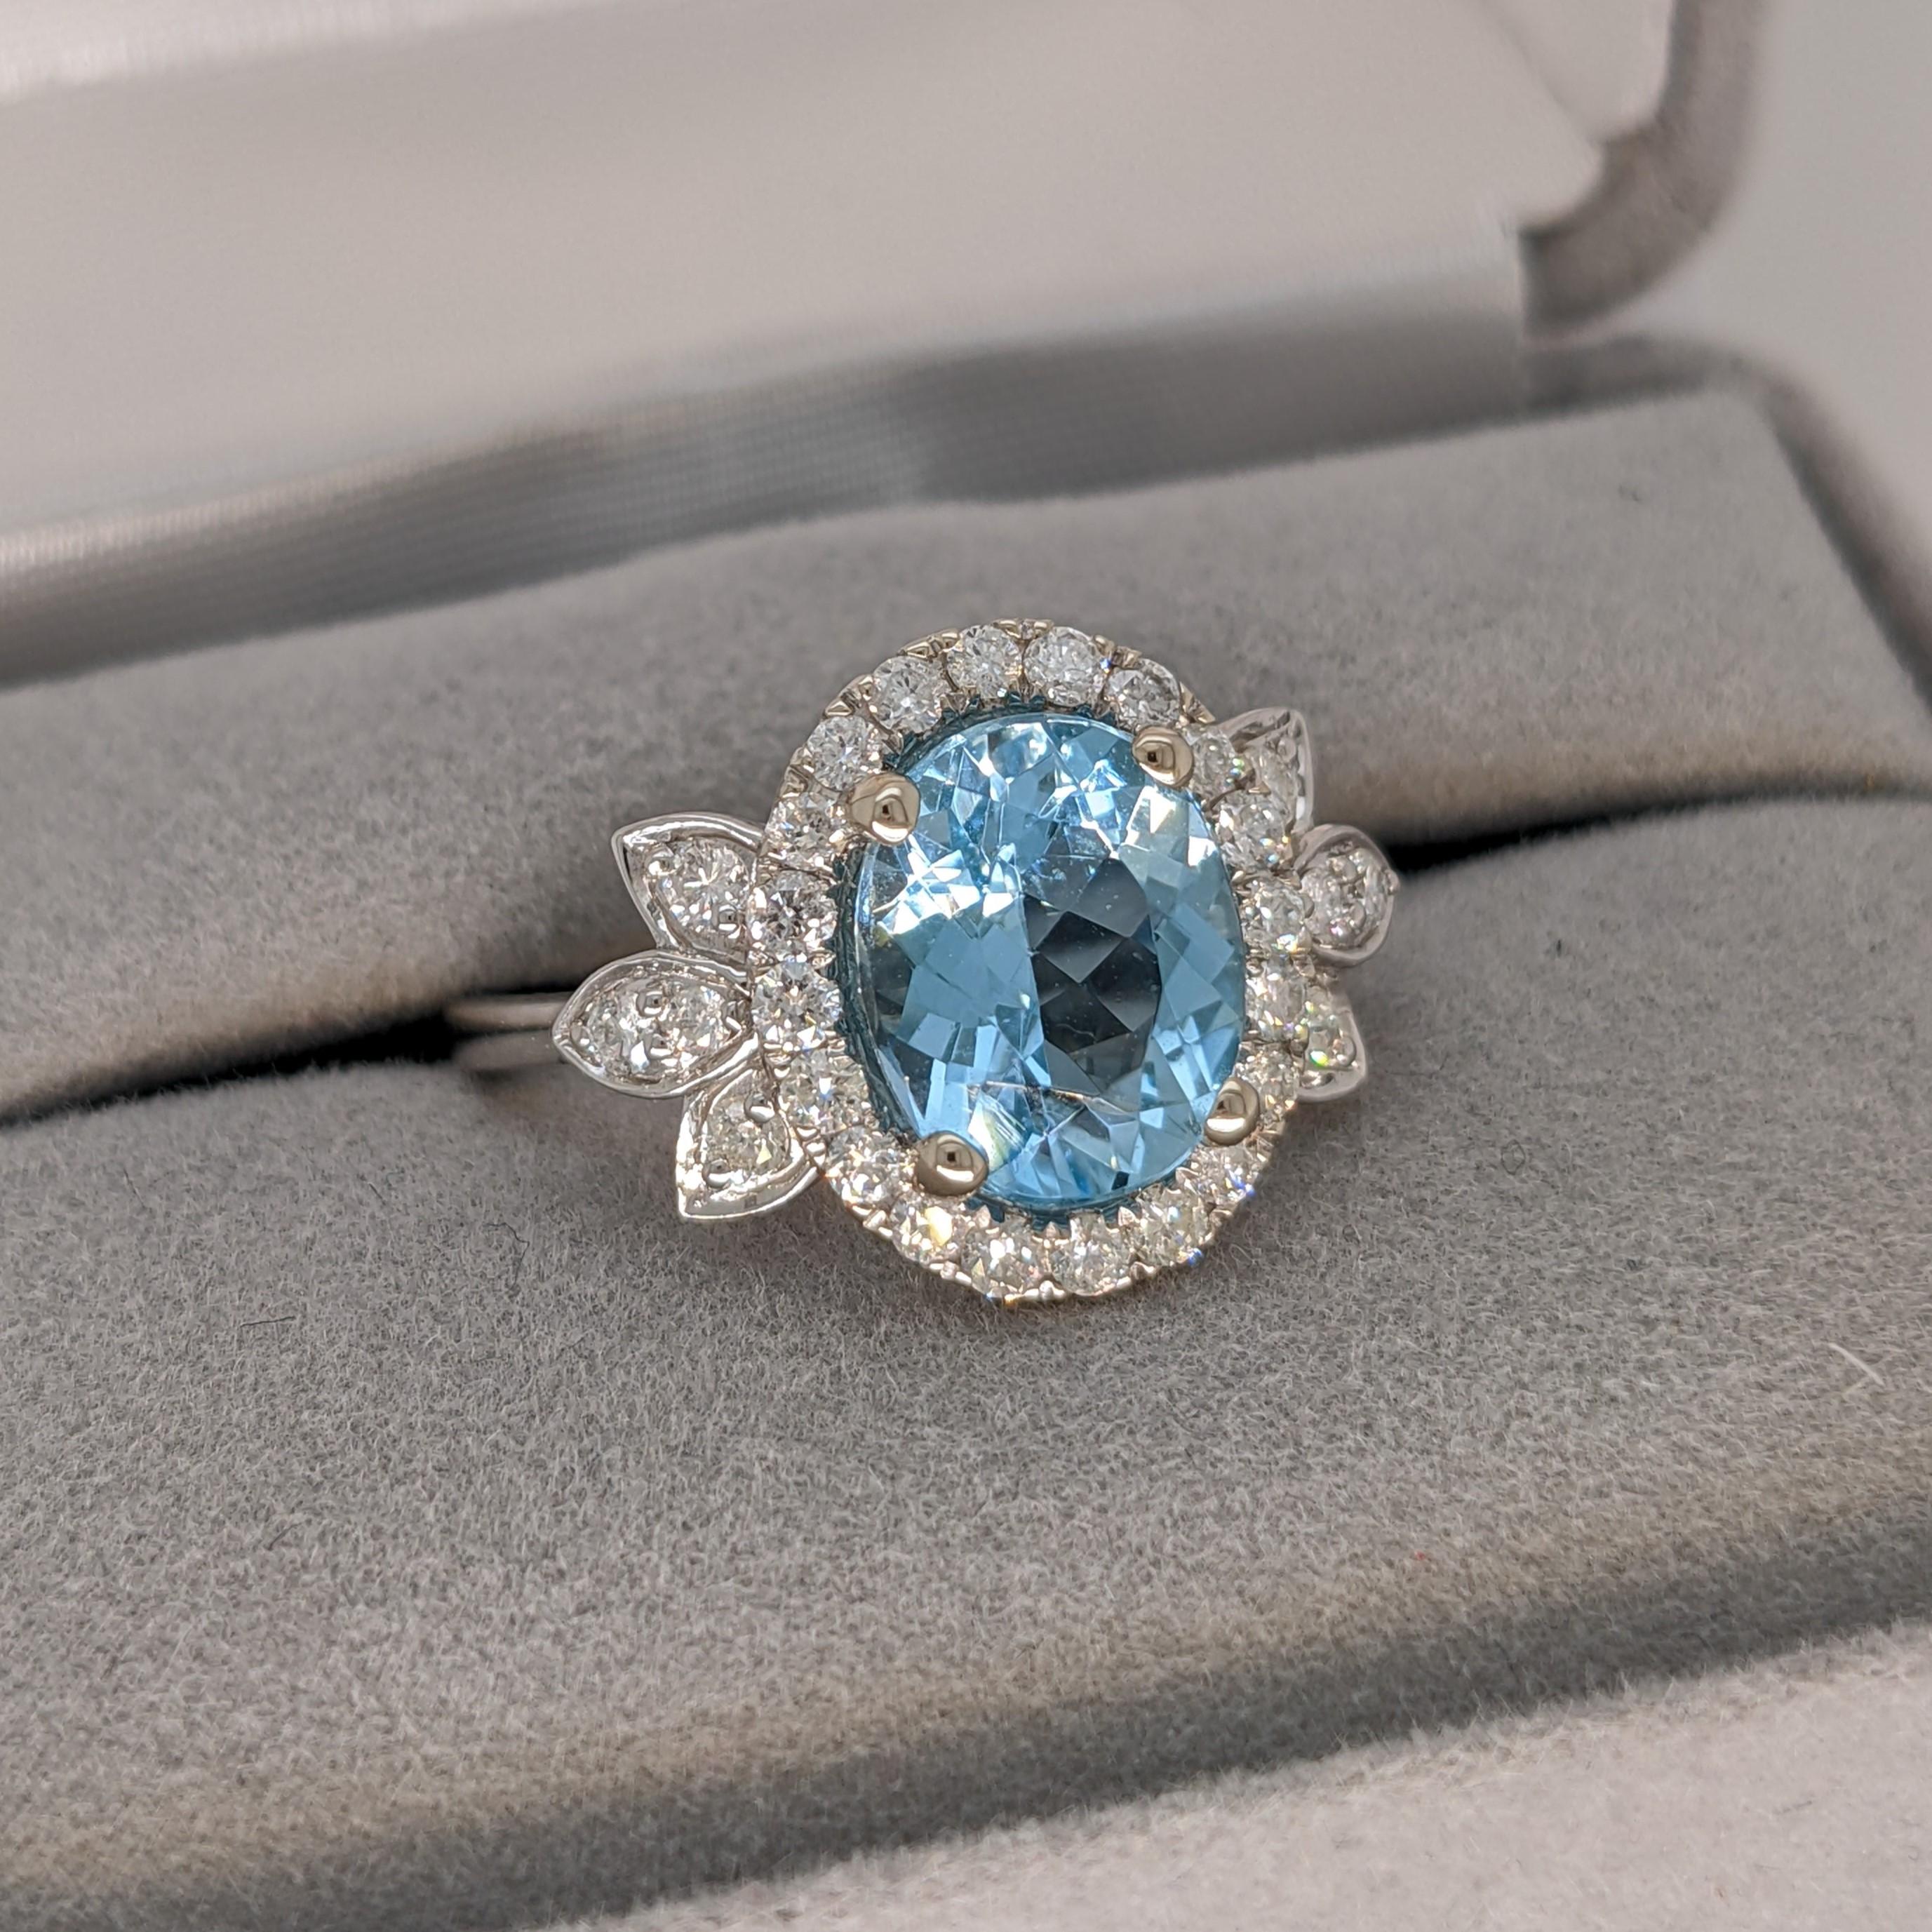 This Santa Maria Aquamarine is a 2.12 carat faceted oval cut gemstone with a gorgeous sea blue color. The ring is made in 14k white gold with diamond studded design elements on either side of the center stone. This ring has a halo of natural earth